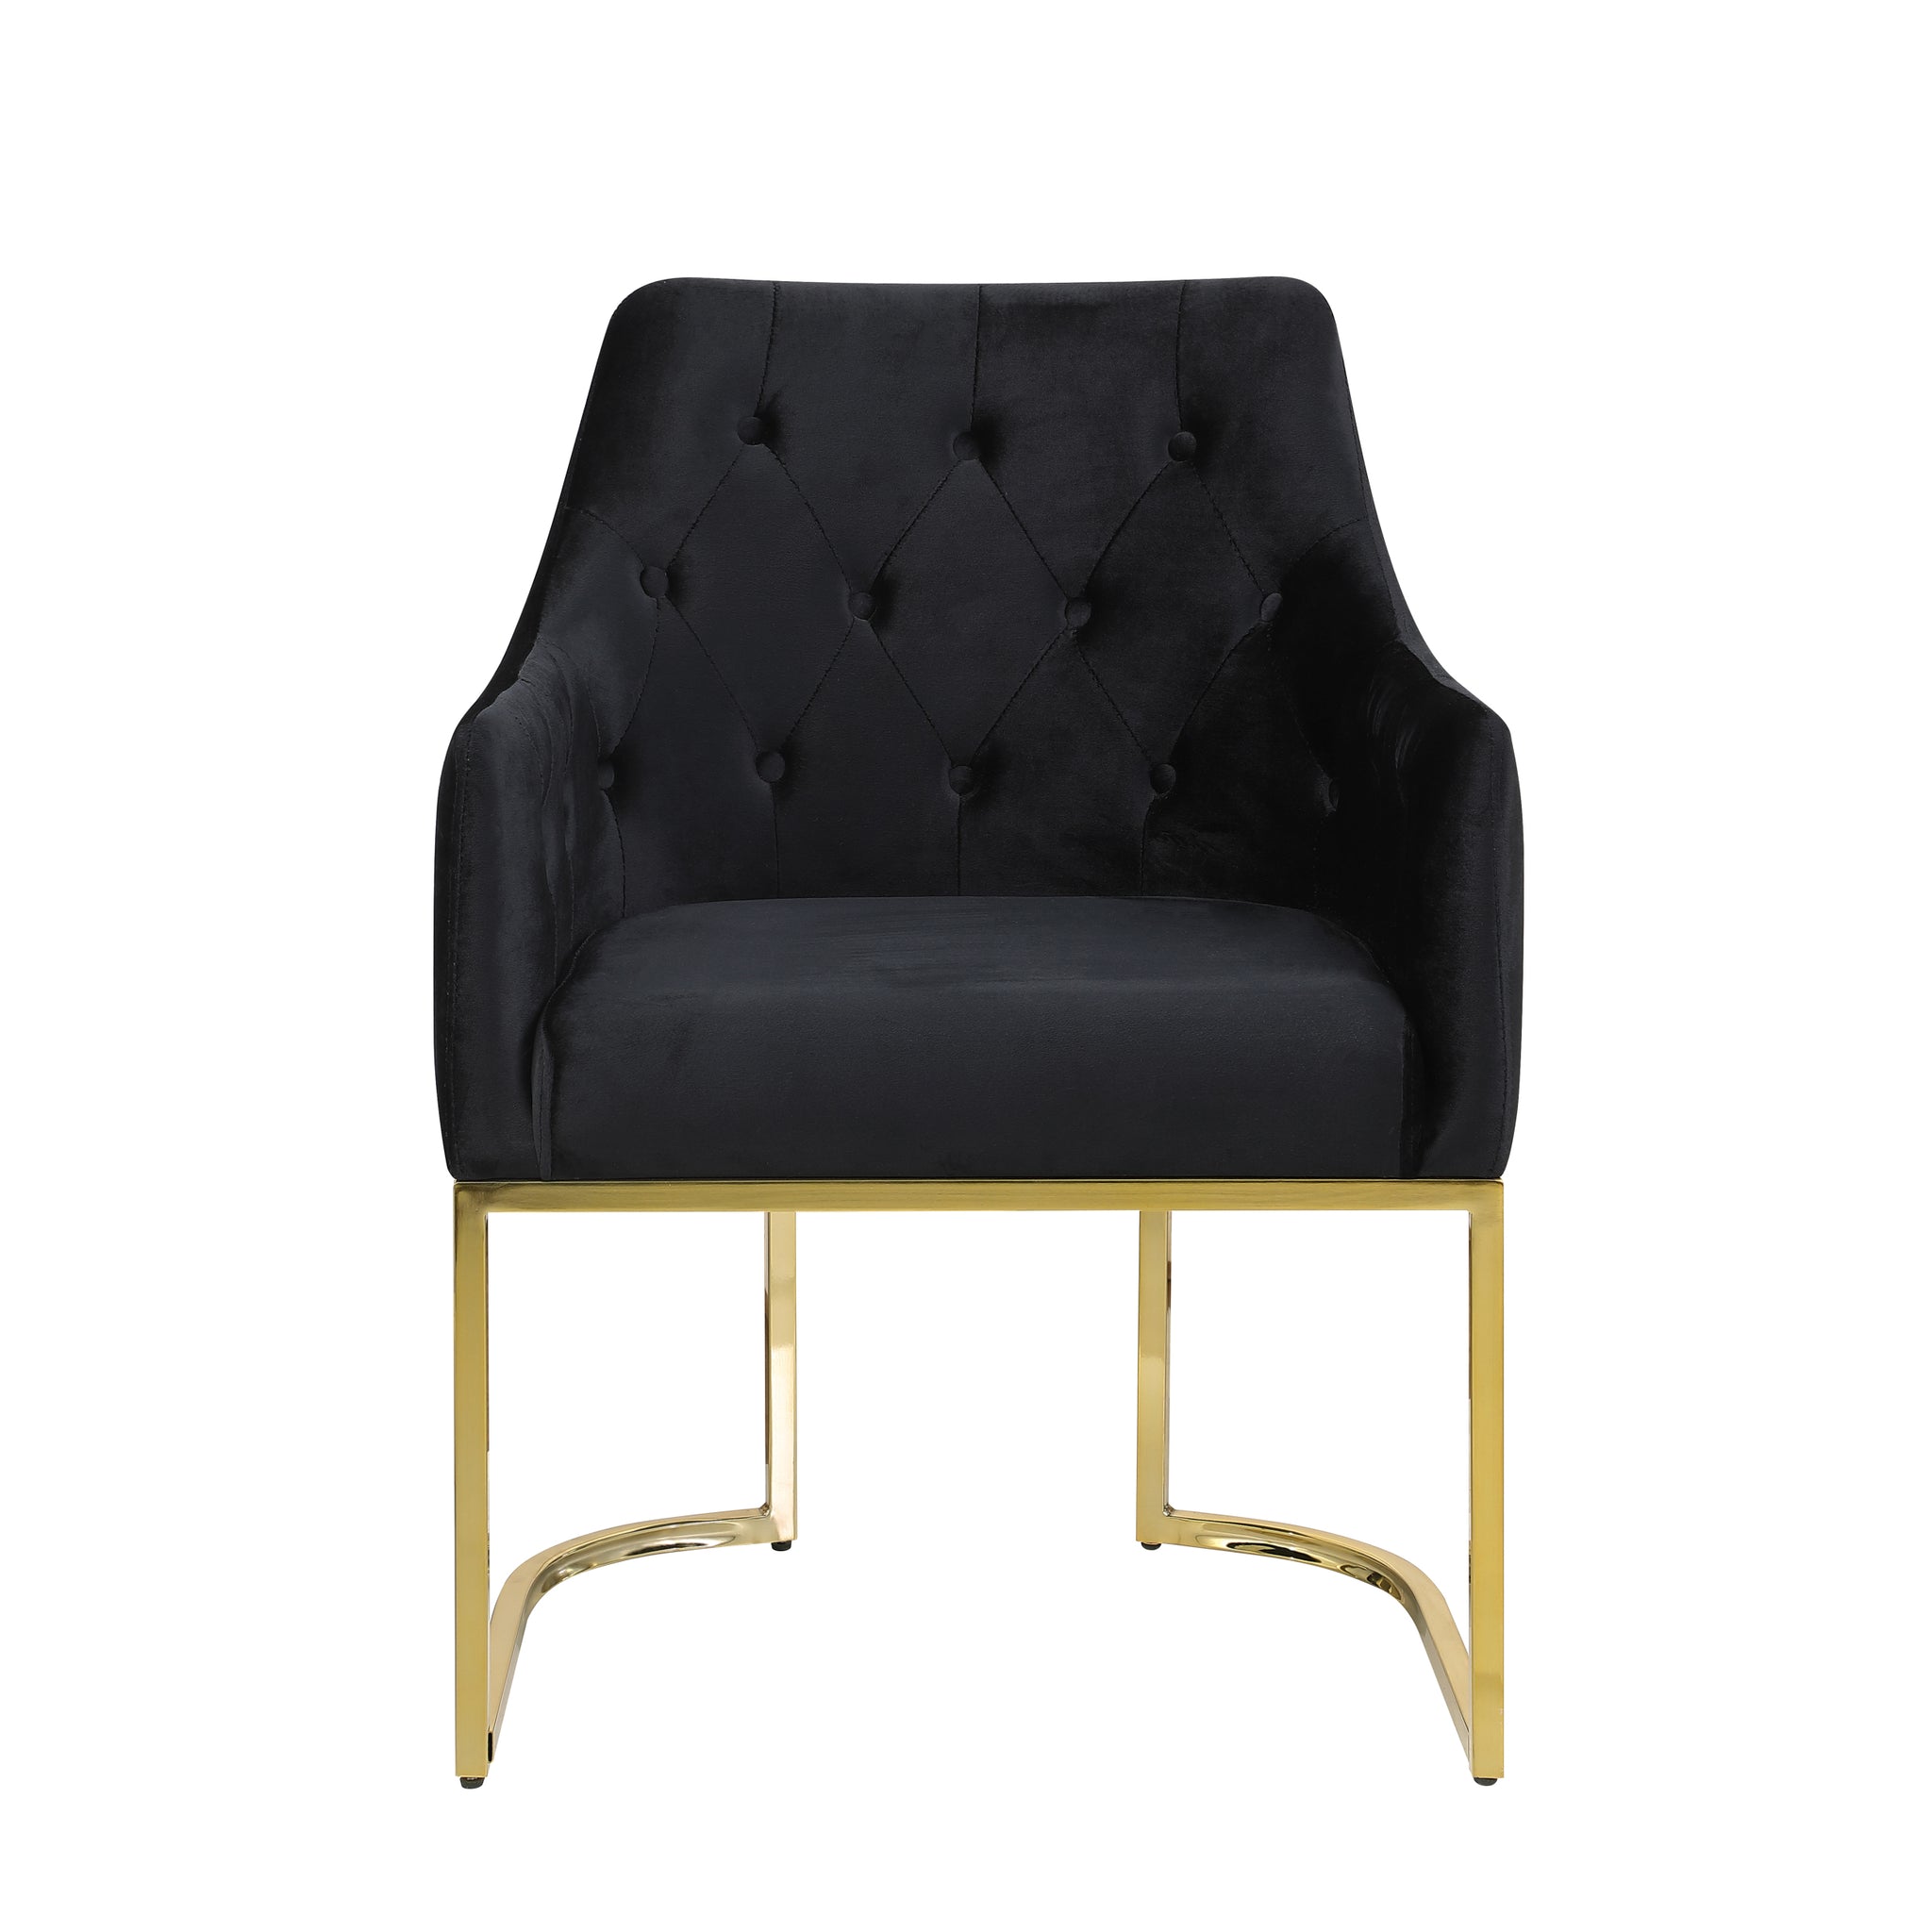 LOZENGE PLAID GOLD BASE ACCENT CHAIR black-primary living